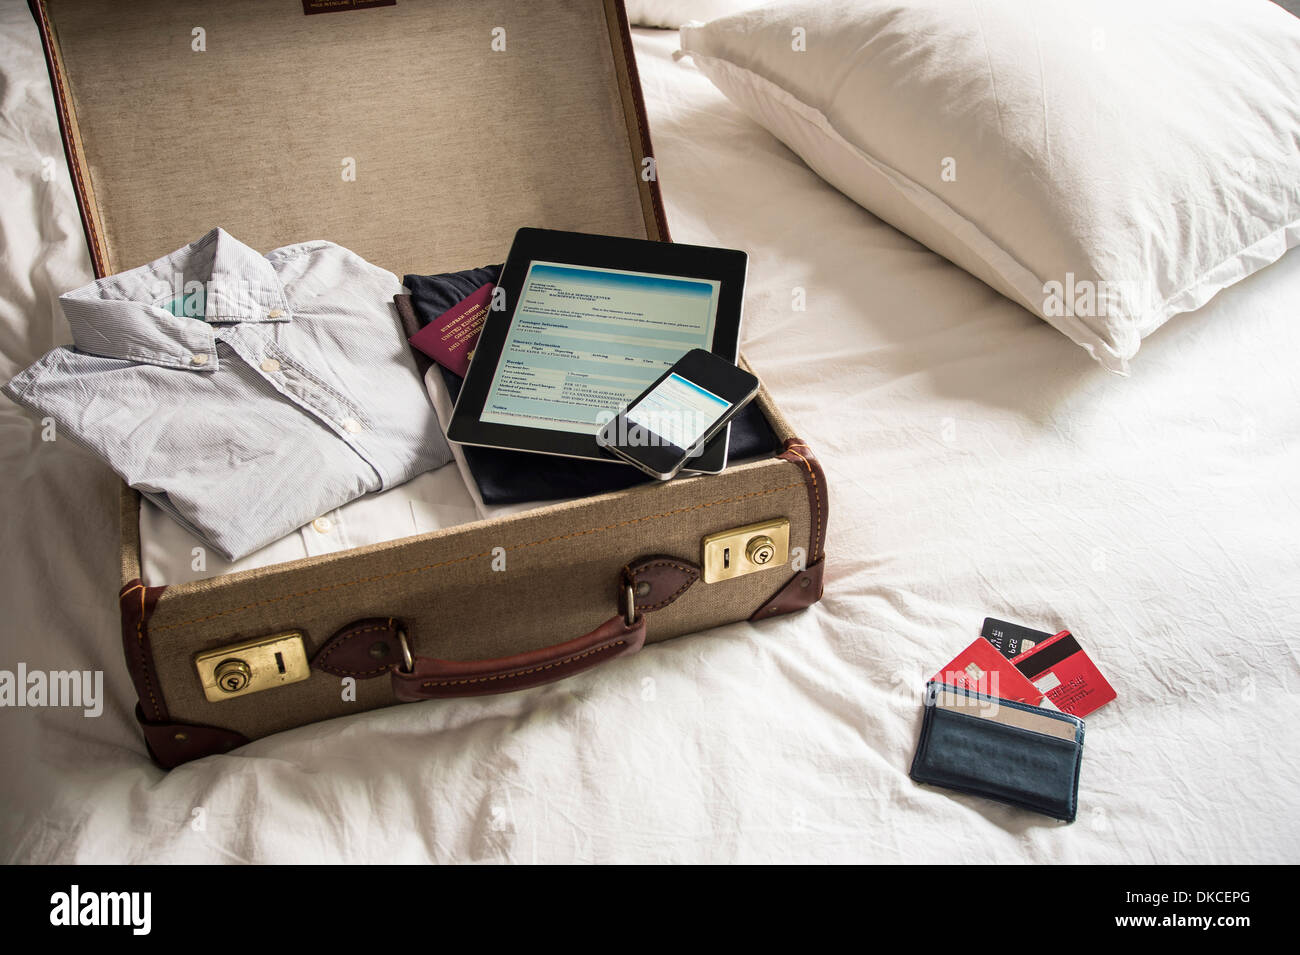 Open suitcase on bed with digital tablet and mobile phone Stock Photo